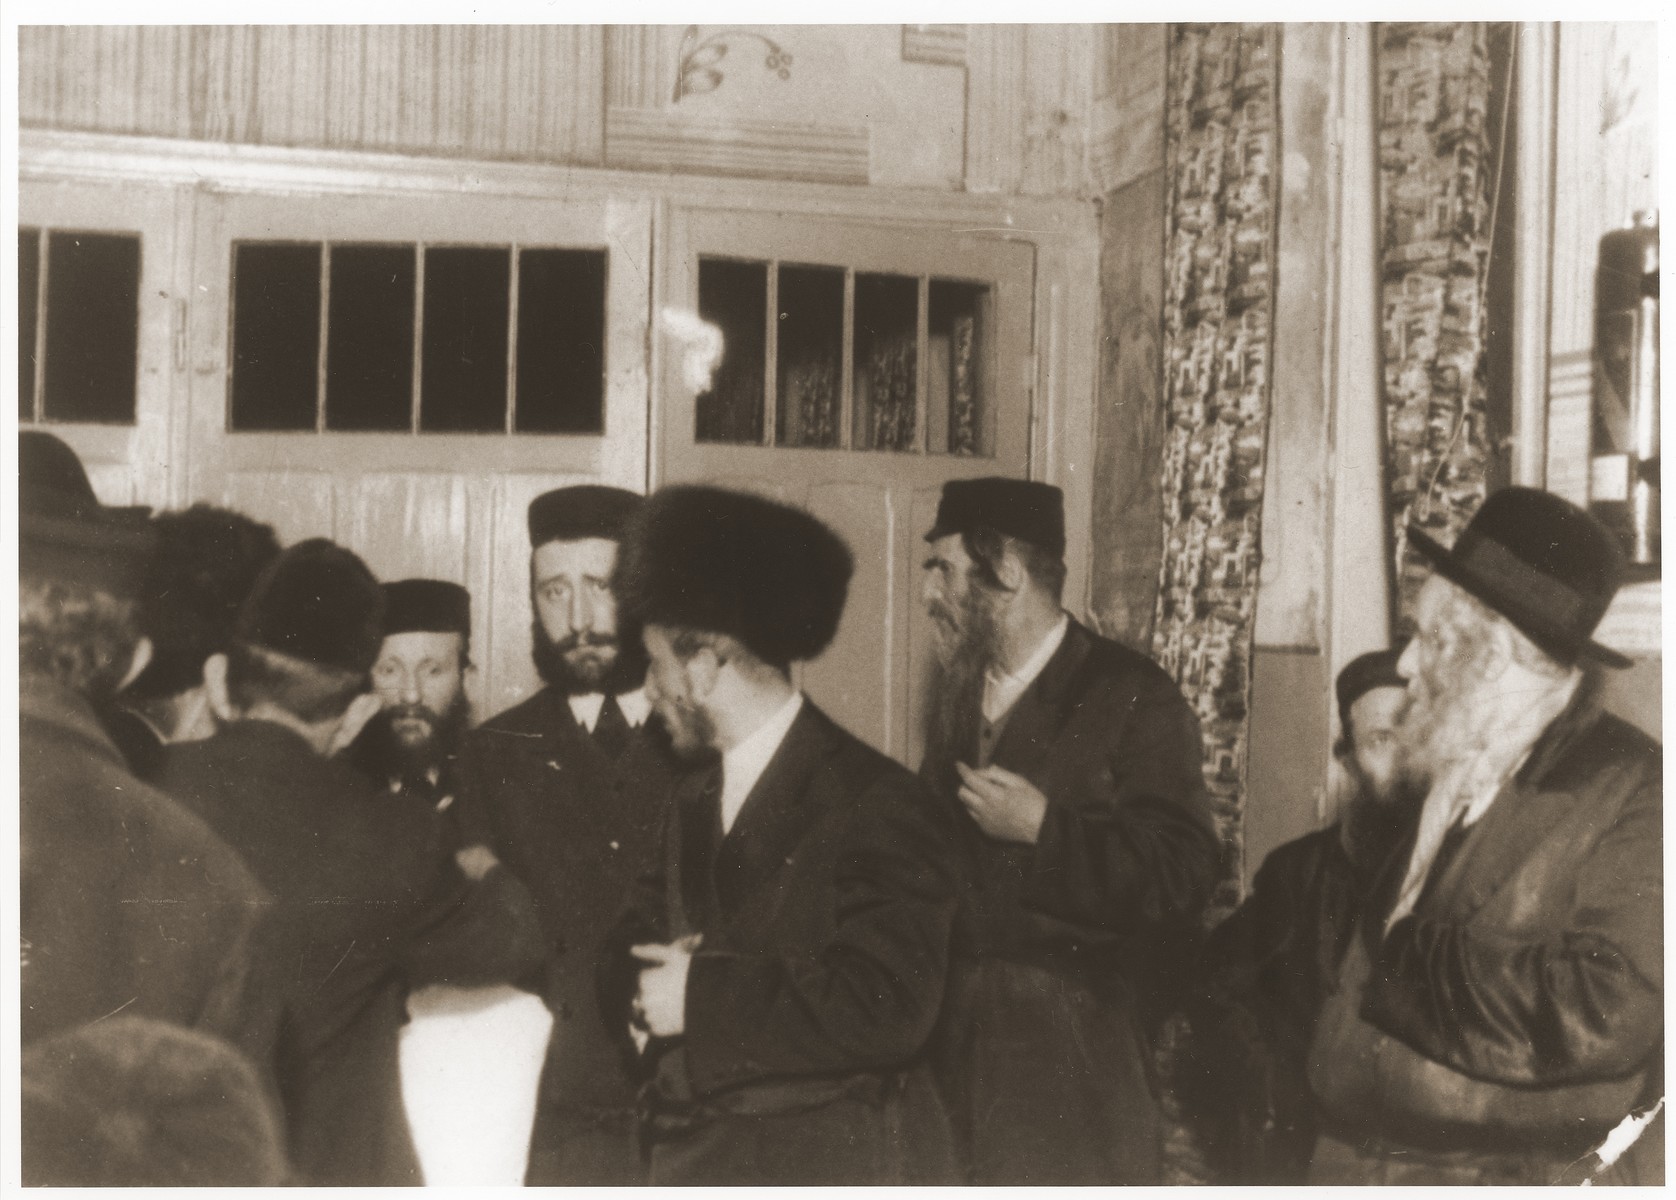 Ger Hasidim, including the rebbe, gather to greet  the bridegroom before a wedding.

Among those pictured are Abram Mordche Kopelman and Symcha Binem Alter.